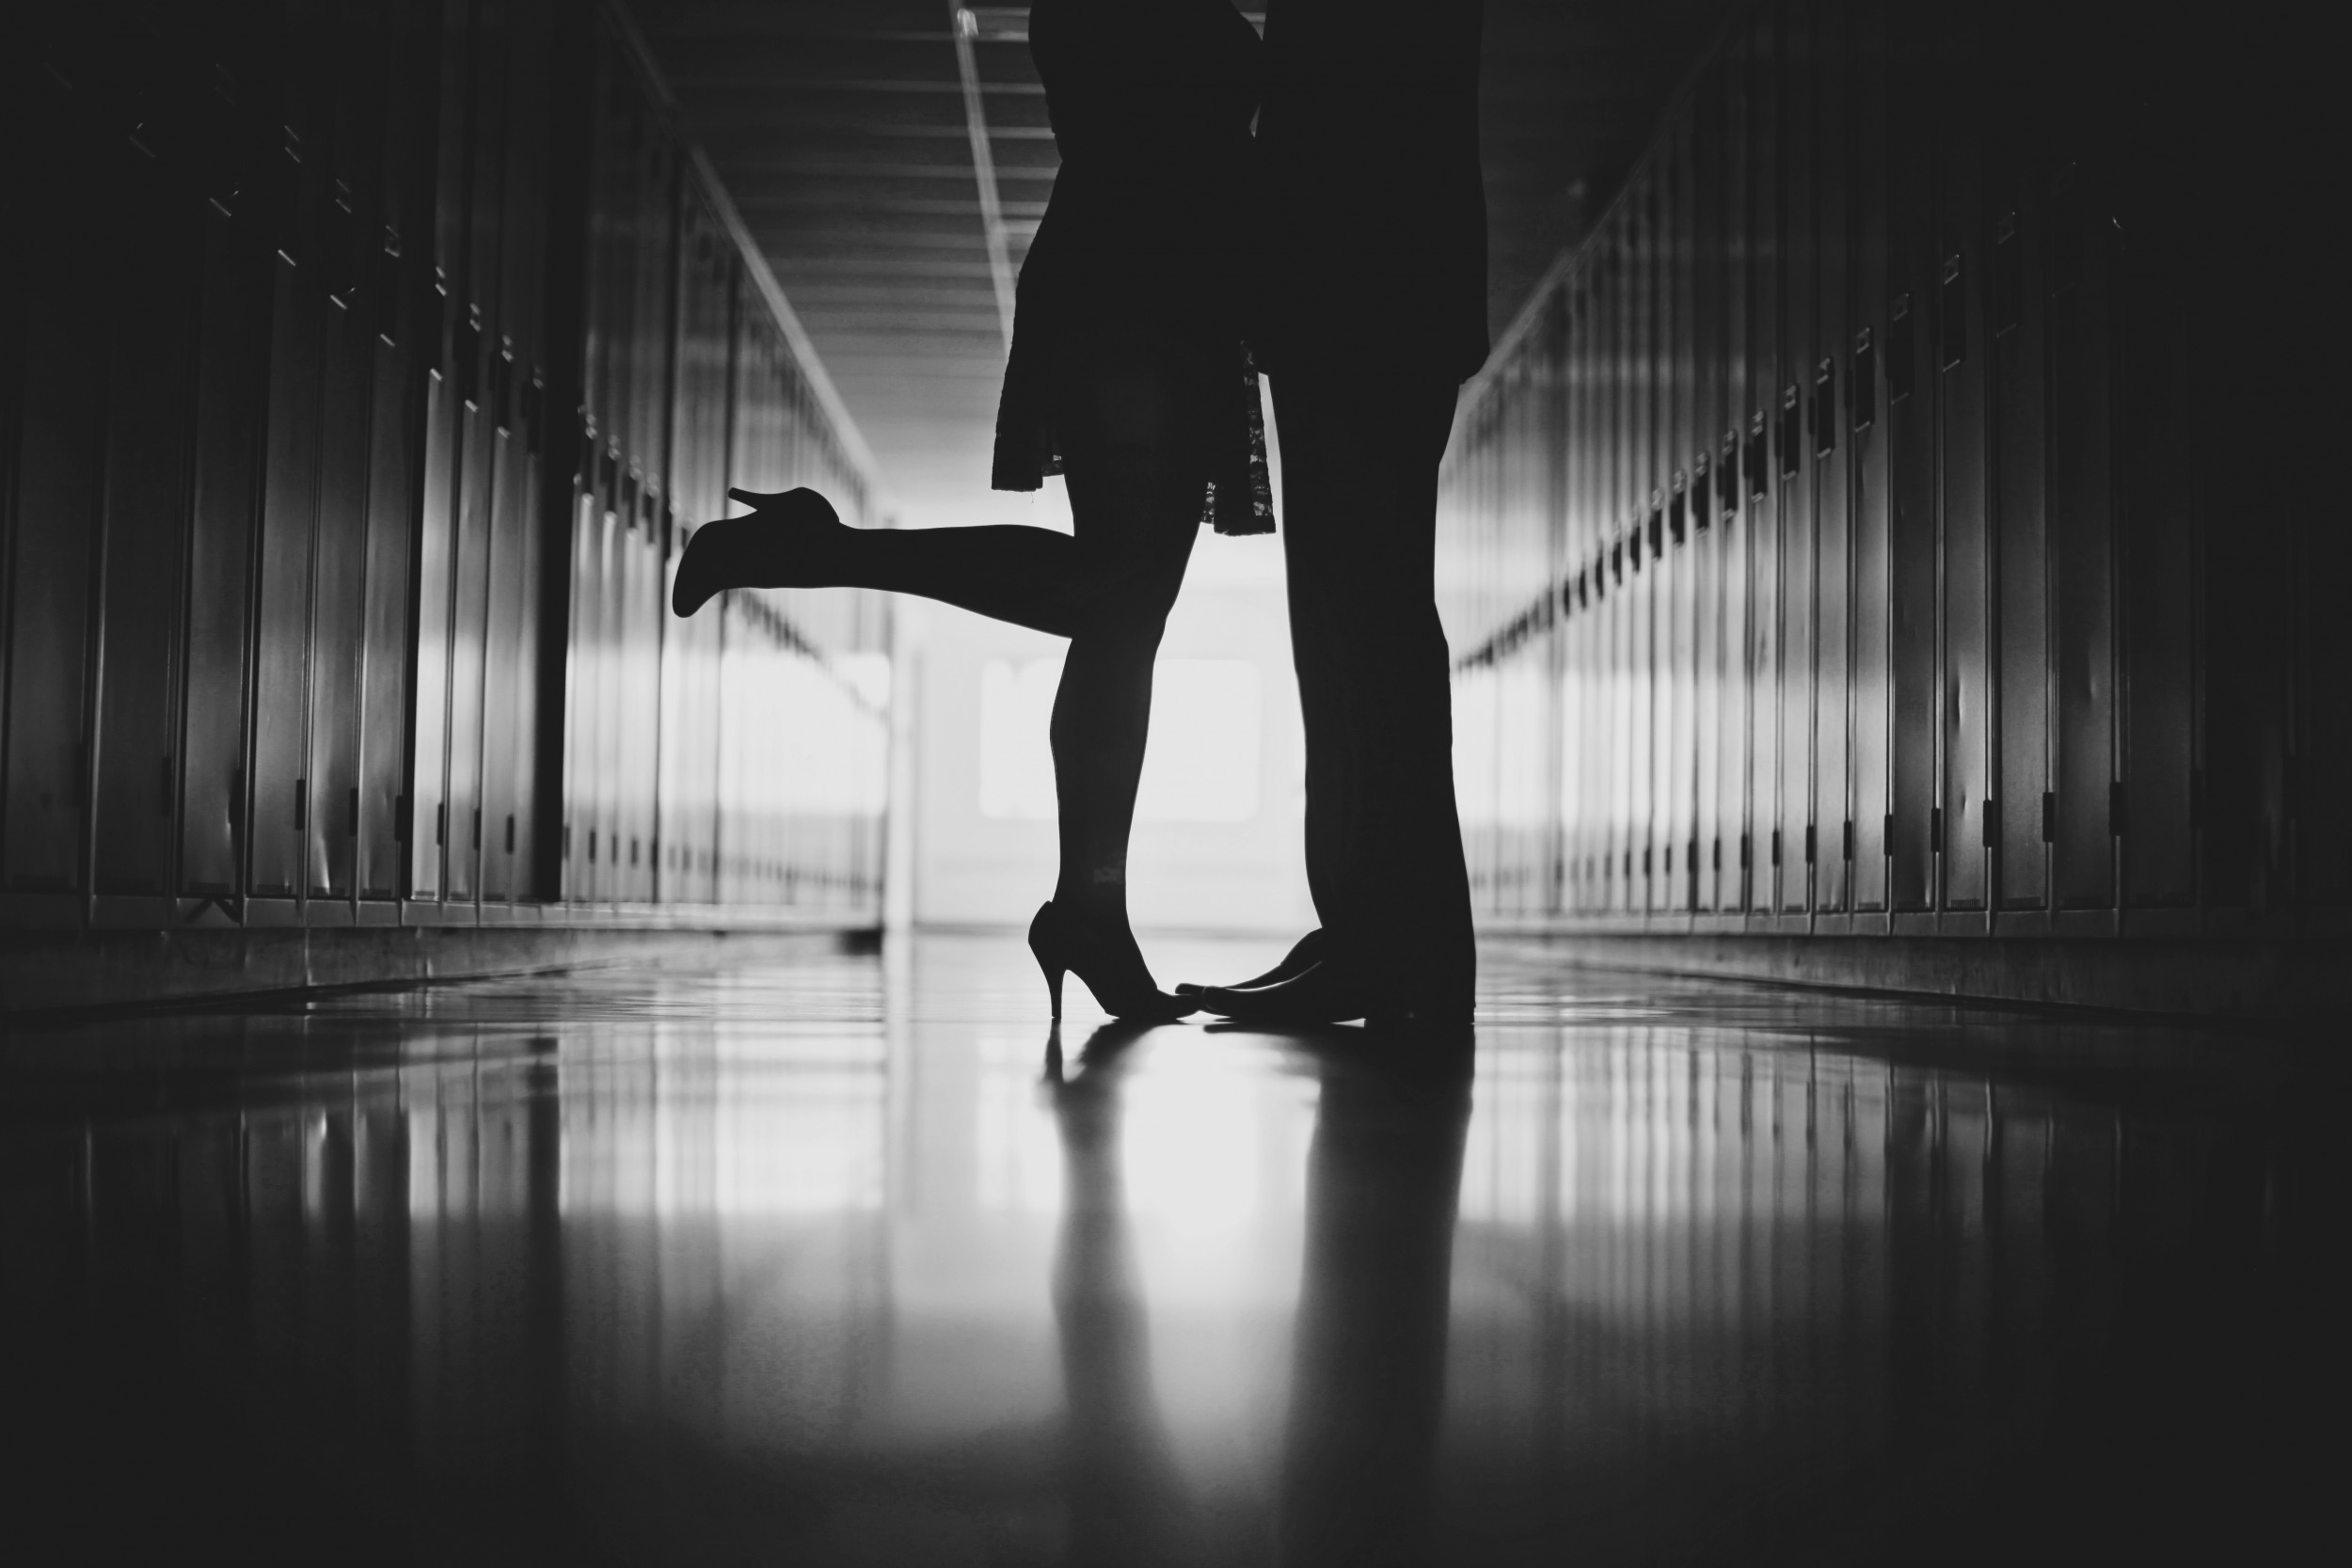 Xnxx Scool - Video Shows Students Having Sex in Maryland Classroom, School and Police  Investigate